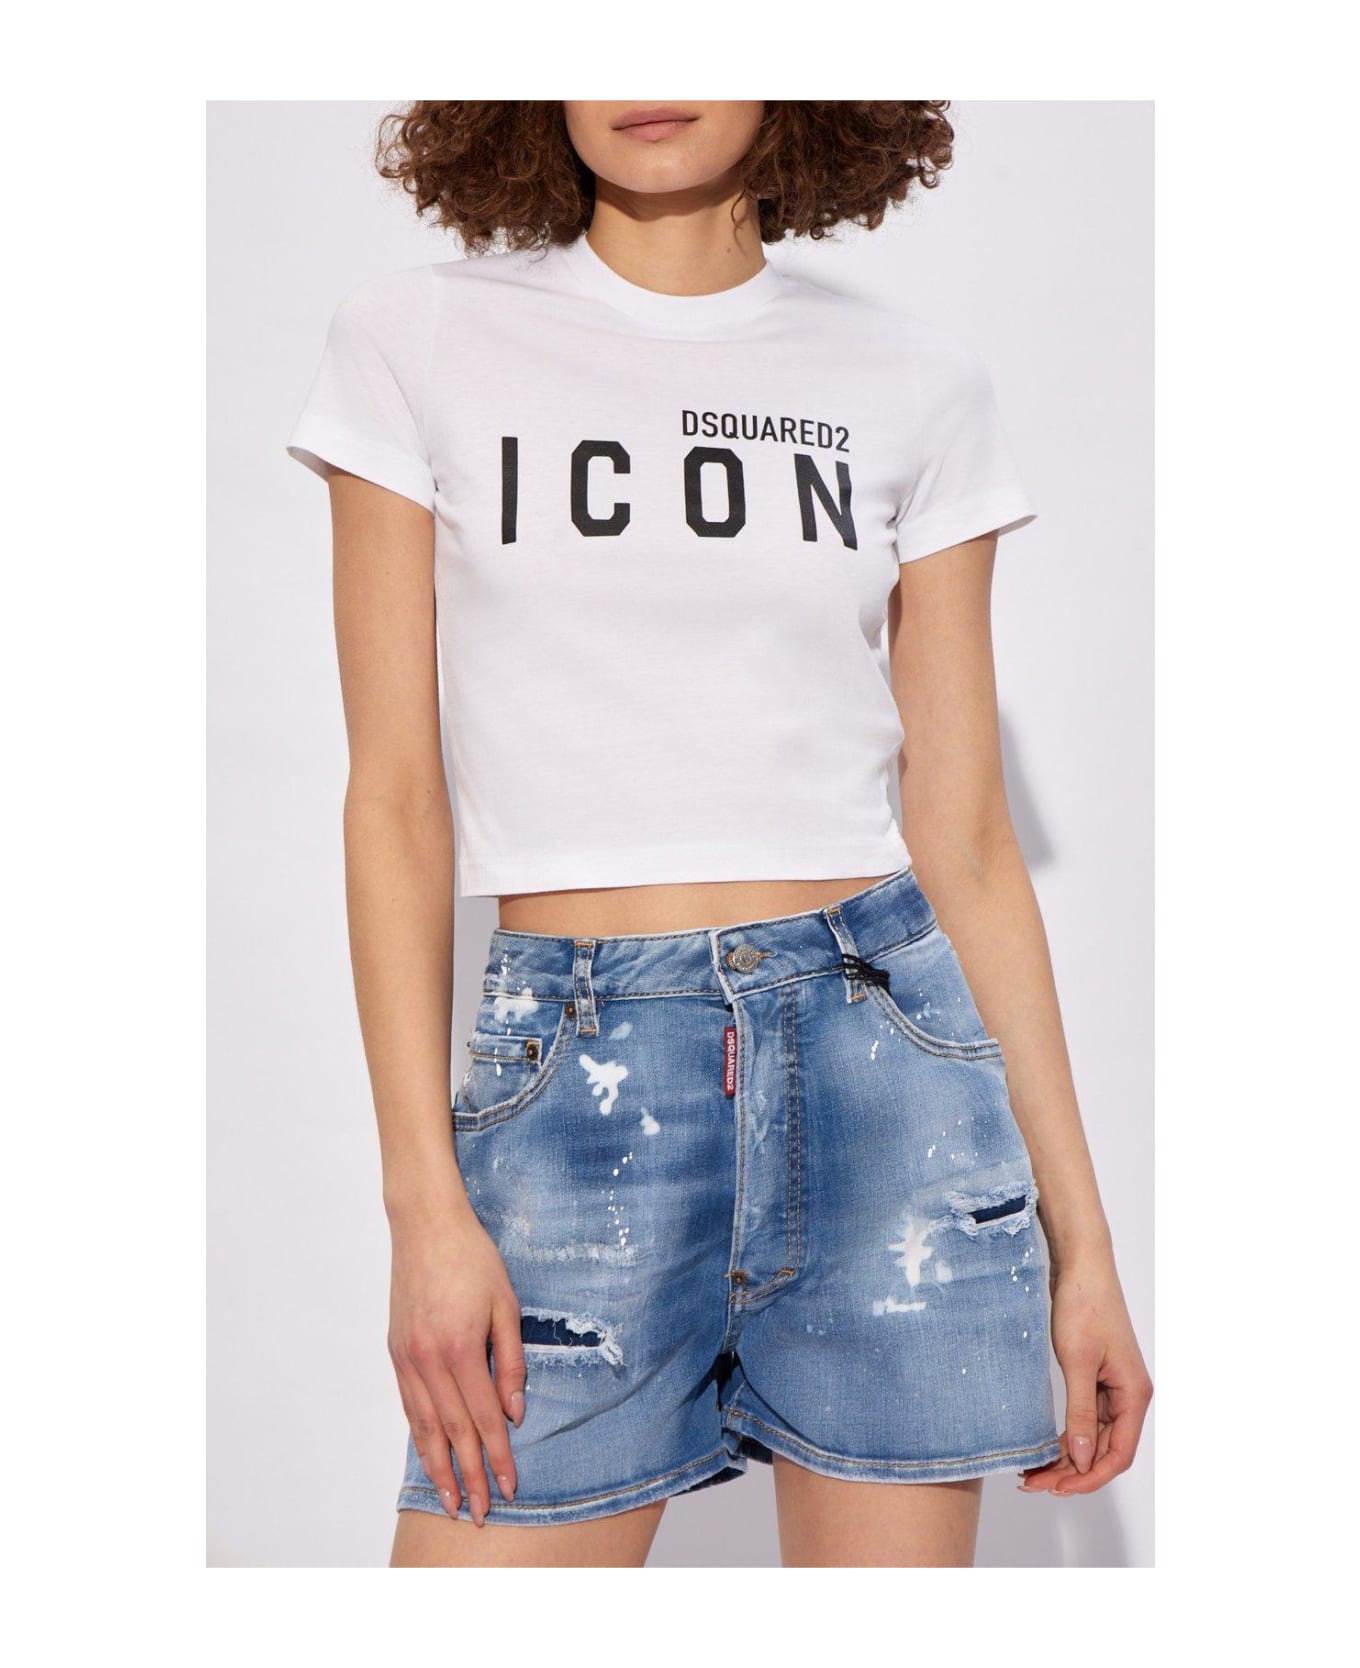 Dsquared2 Logo Printed Cropped T-shirt - White